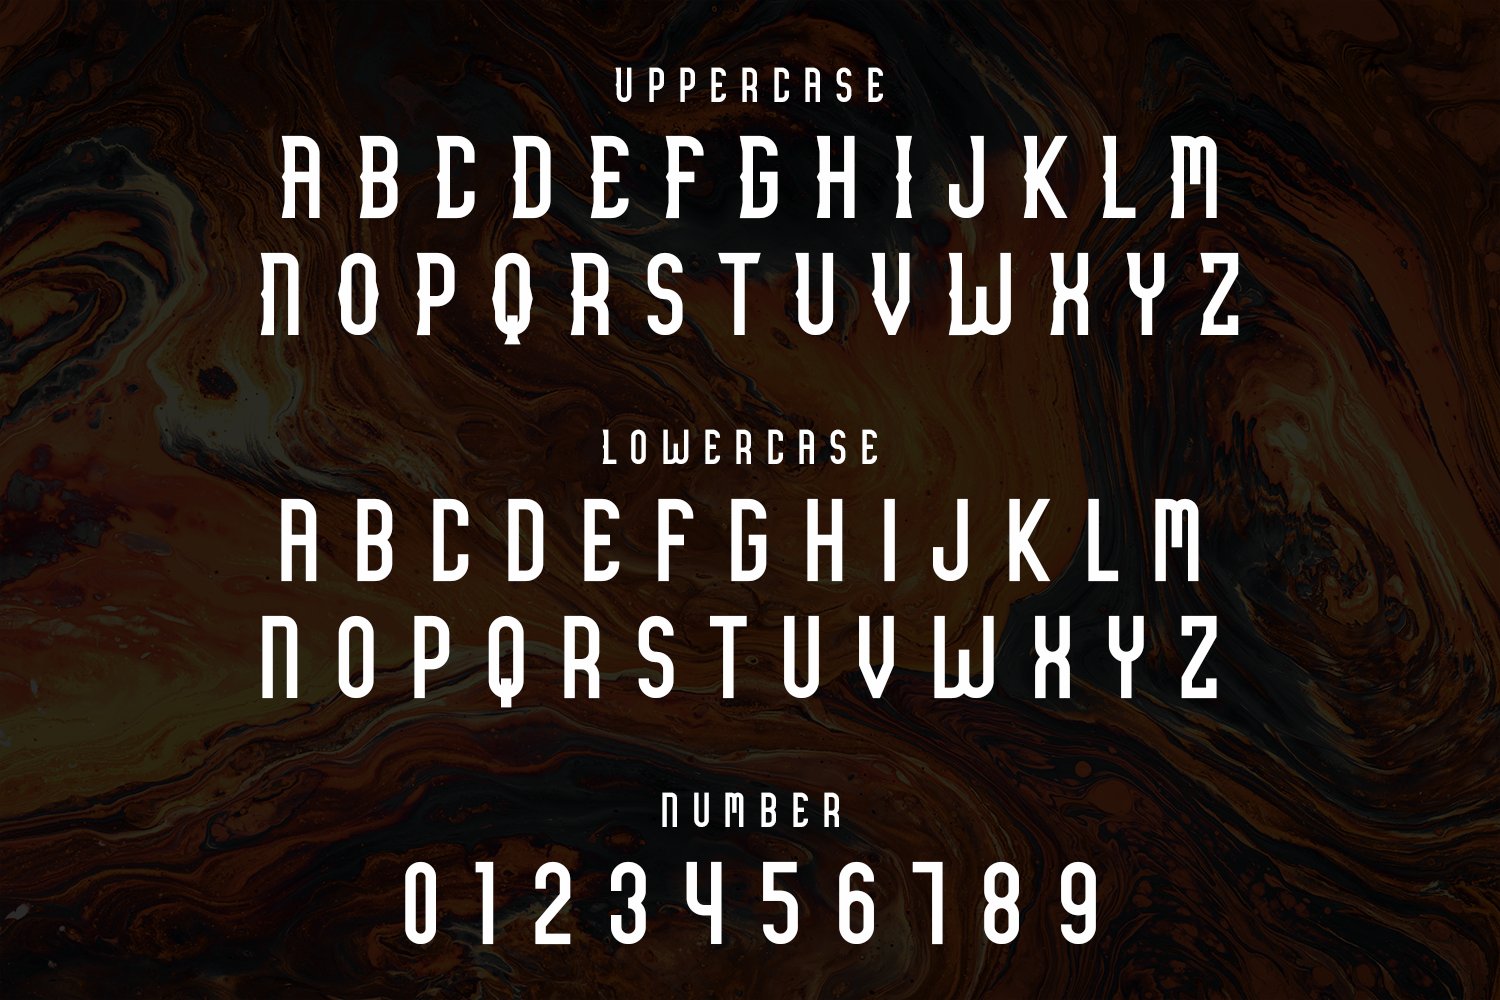 A set of different type of font and numbers.